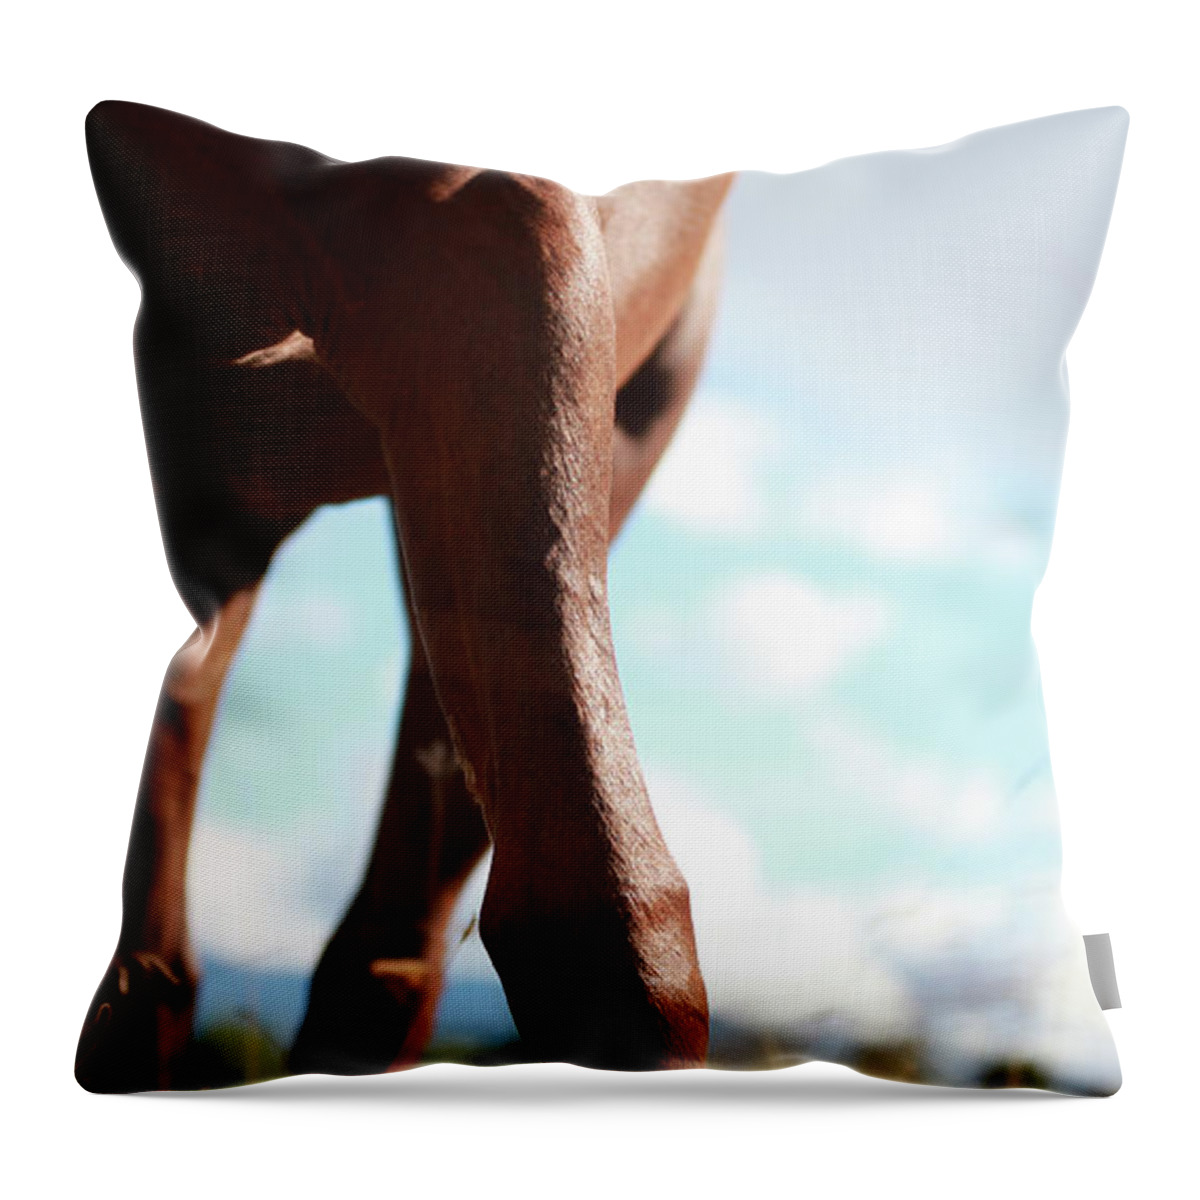 Autumn Throw Pillow featuring the photograph Copper Legs by Listen To Your Horse